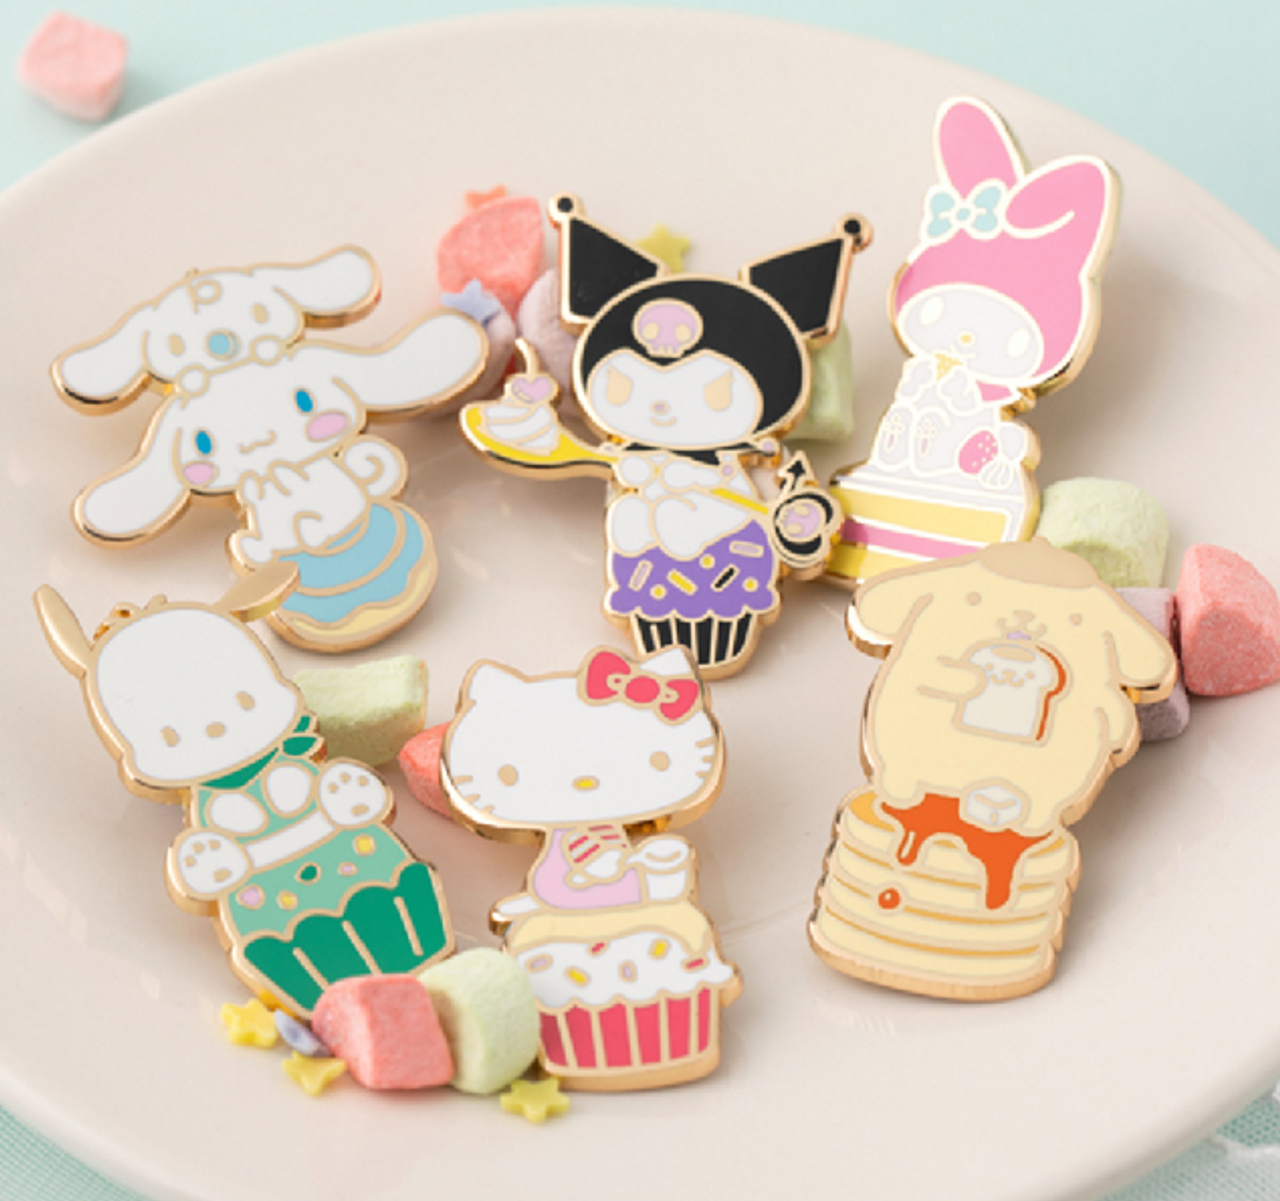 Sanrio Characters Kitty Summer Theme Pin Badge 6 pcs Set Authentic 100%